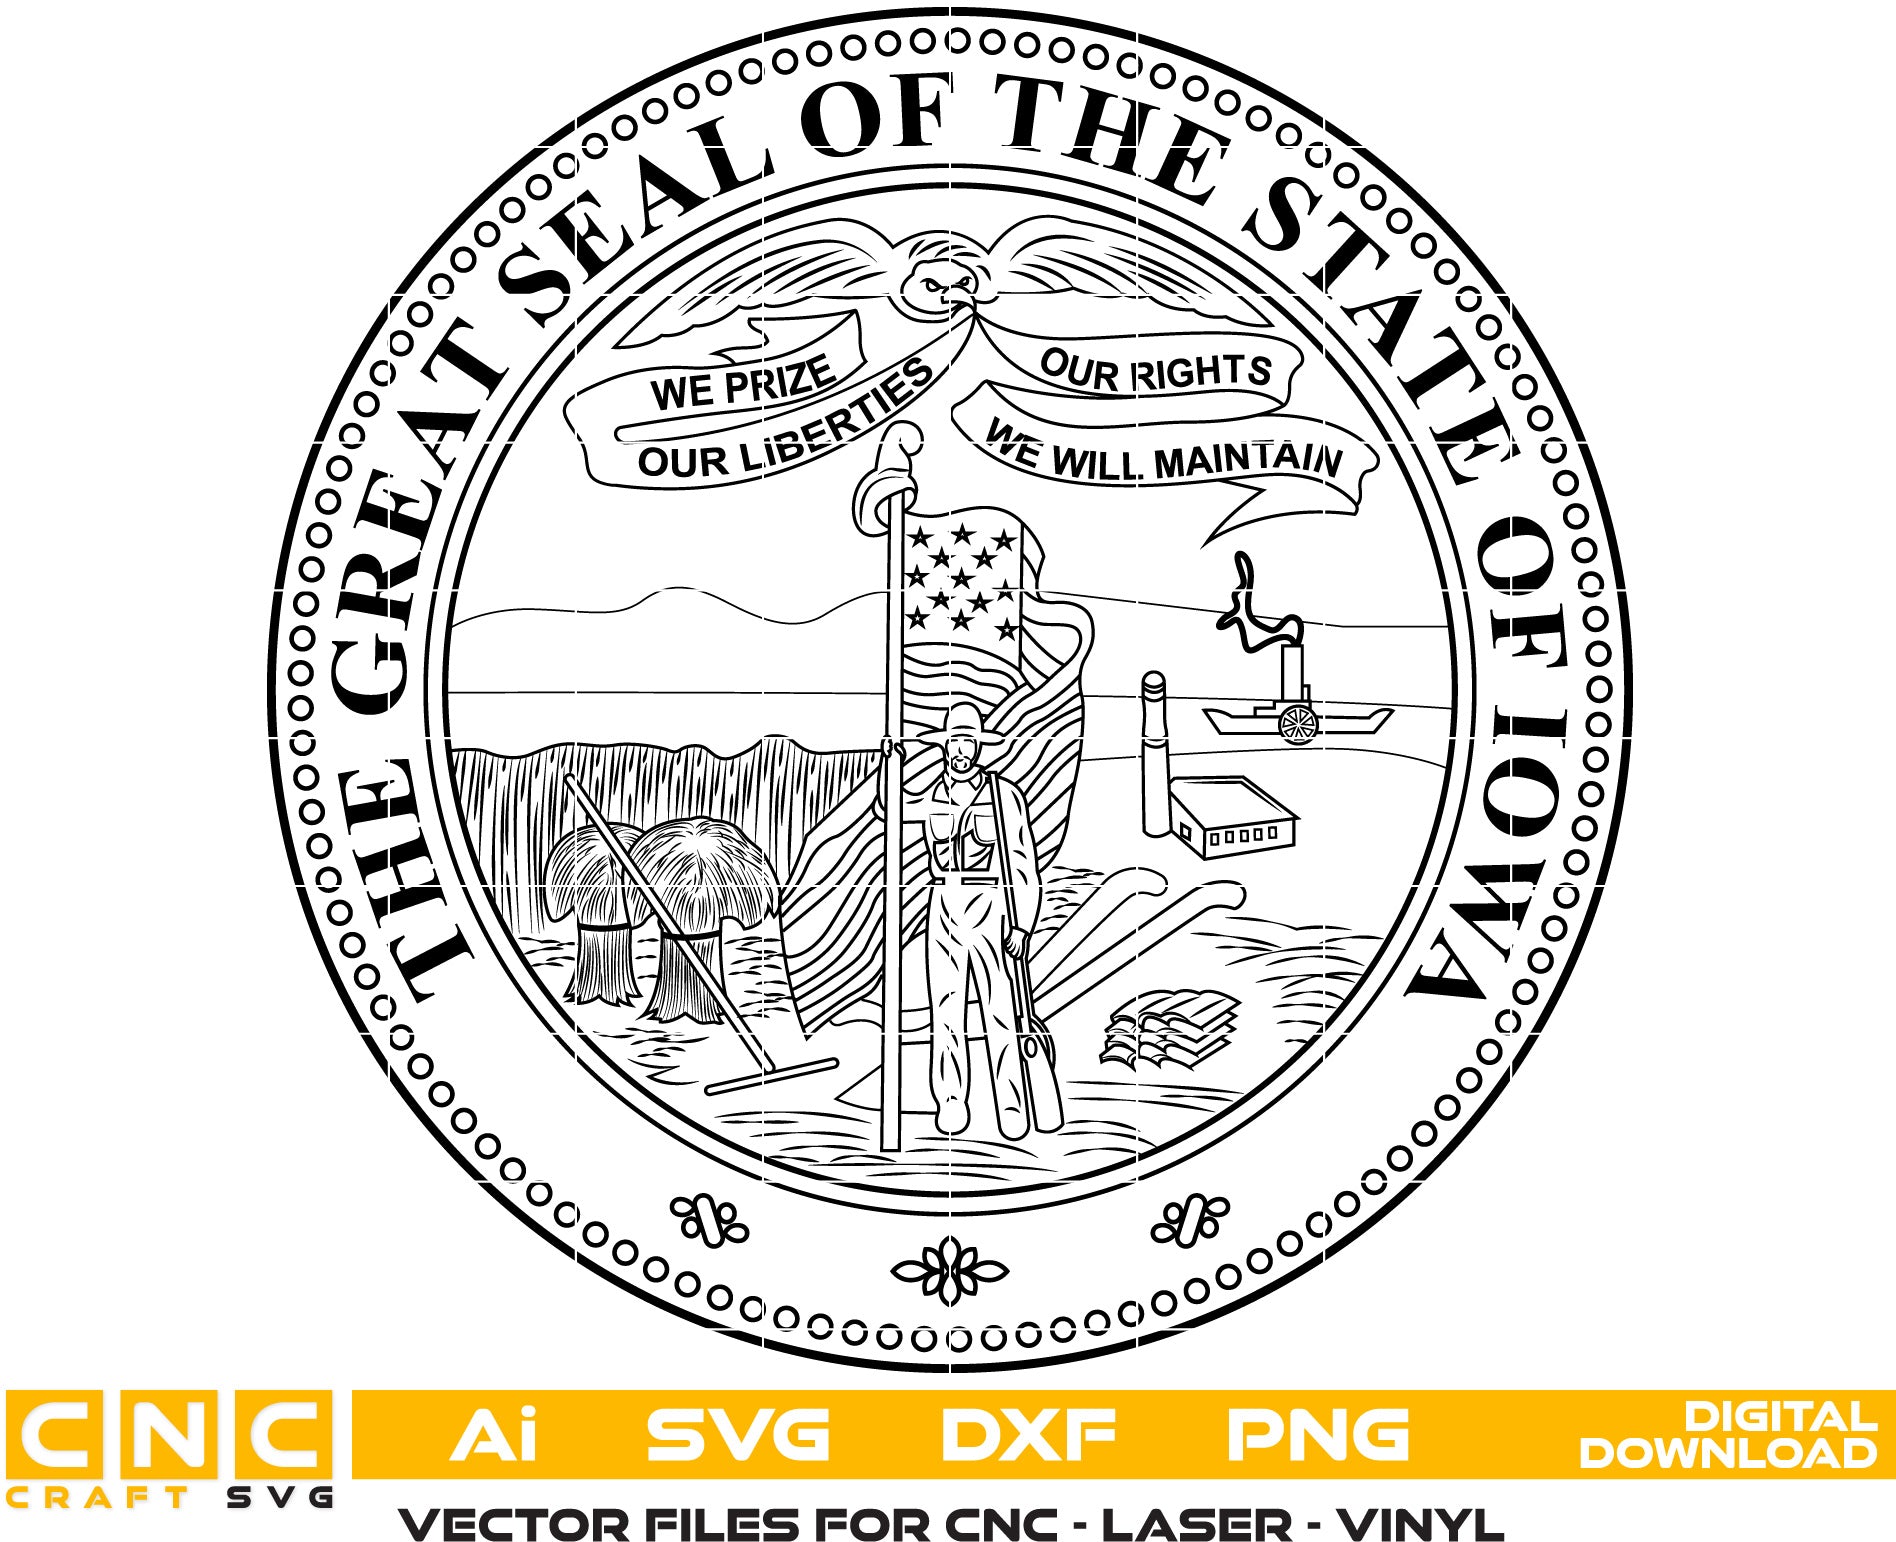 State of Iowa Seal vector art for Laser Engraving, Woodworking, Printing